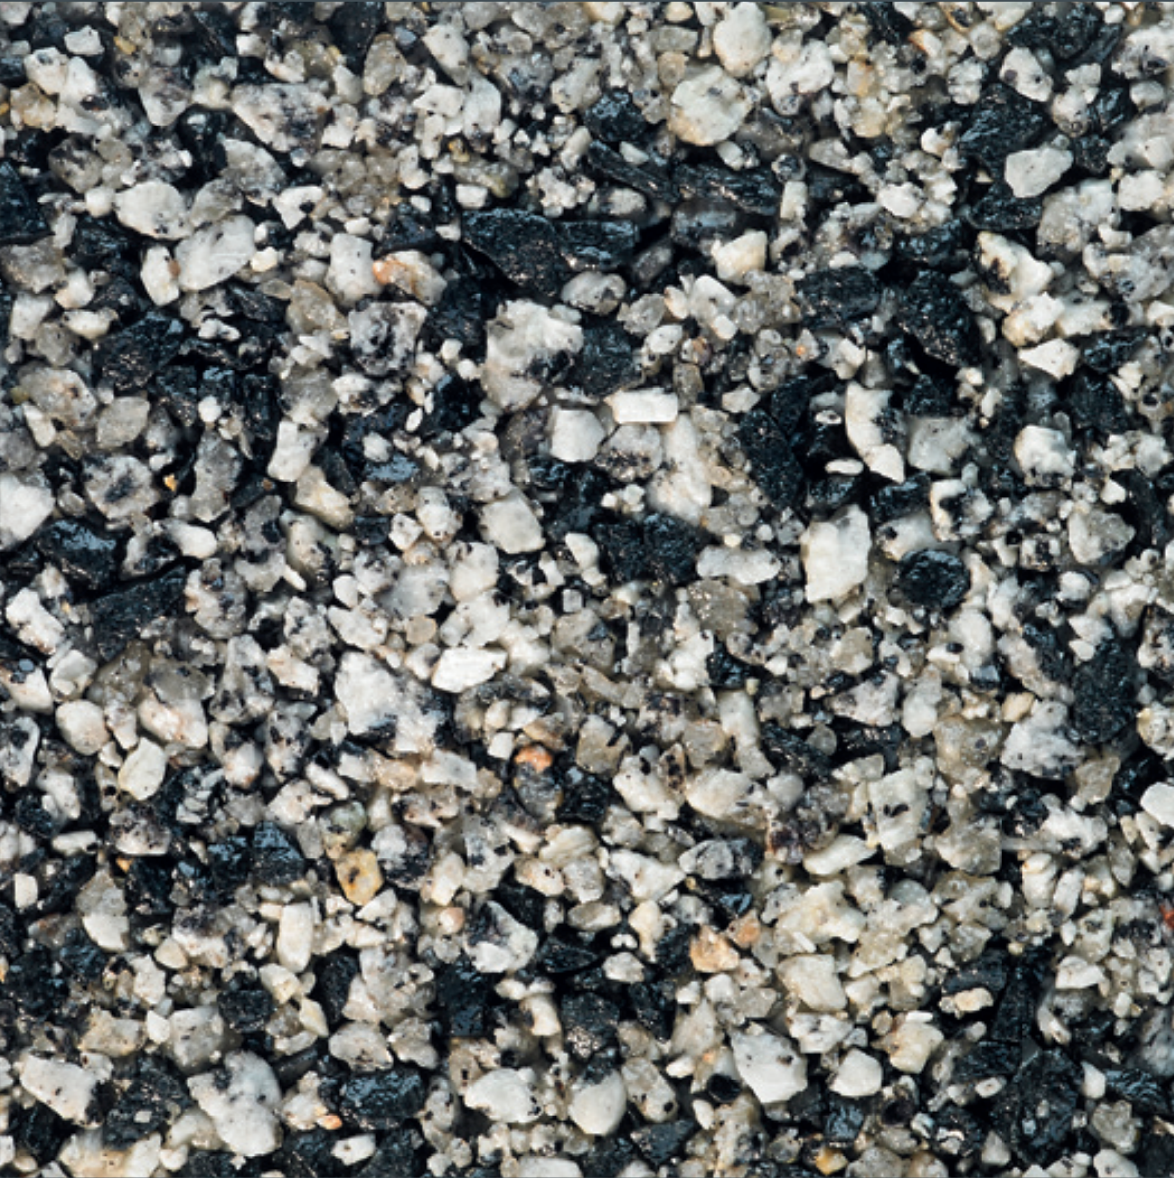 Moonshadow blend, colour for resin driveways, footpaths, and patios.